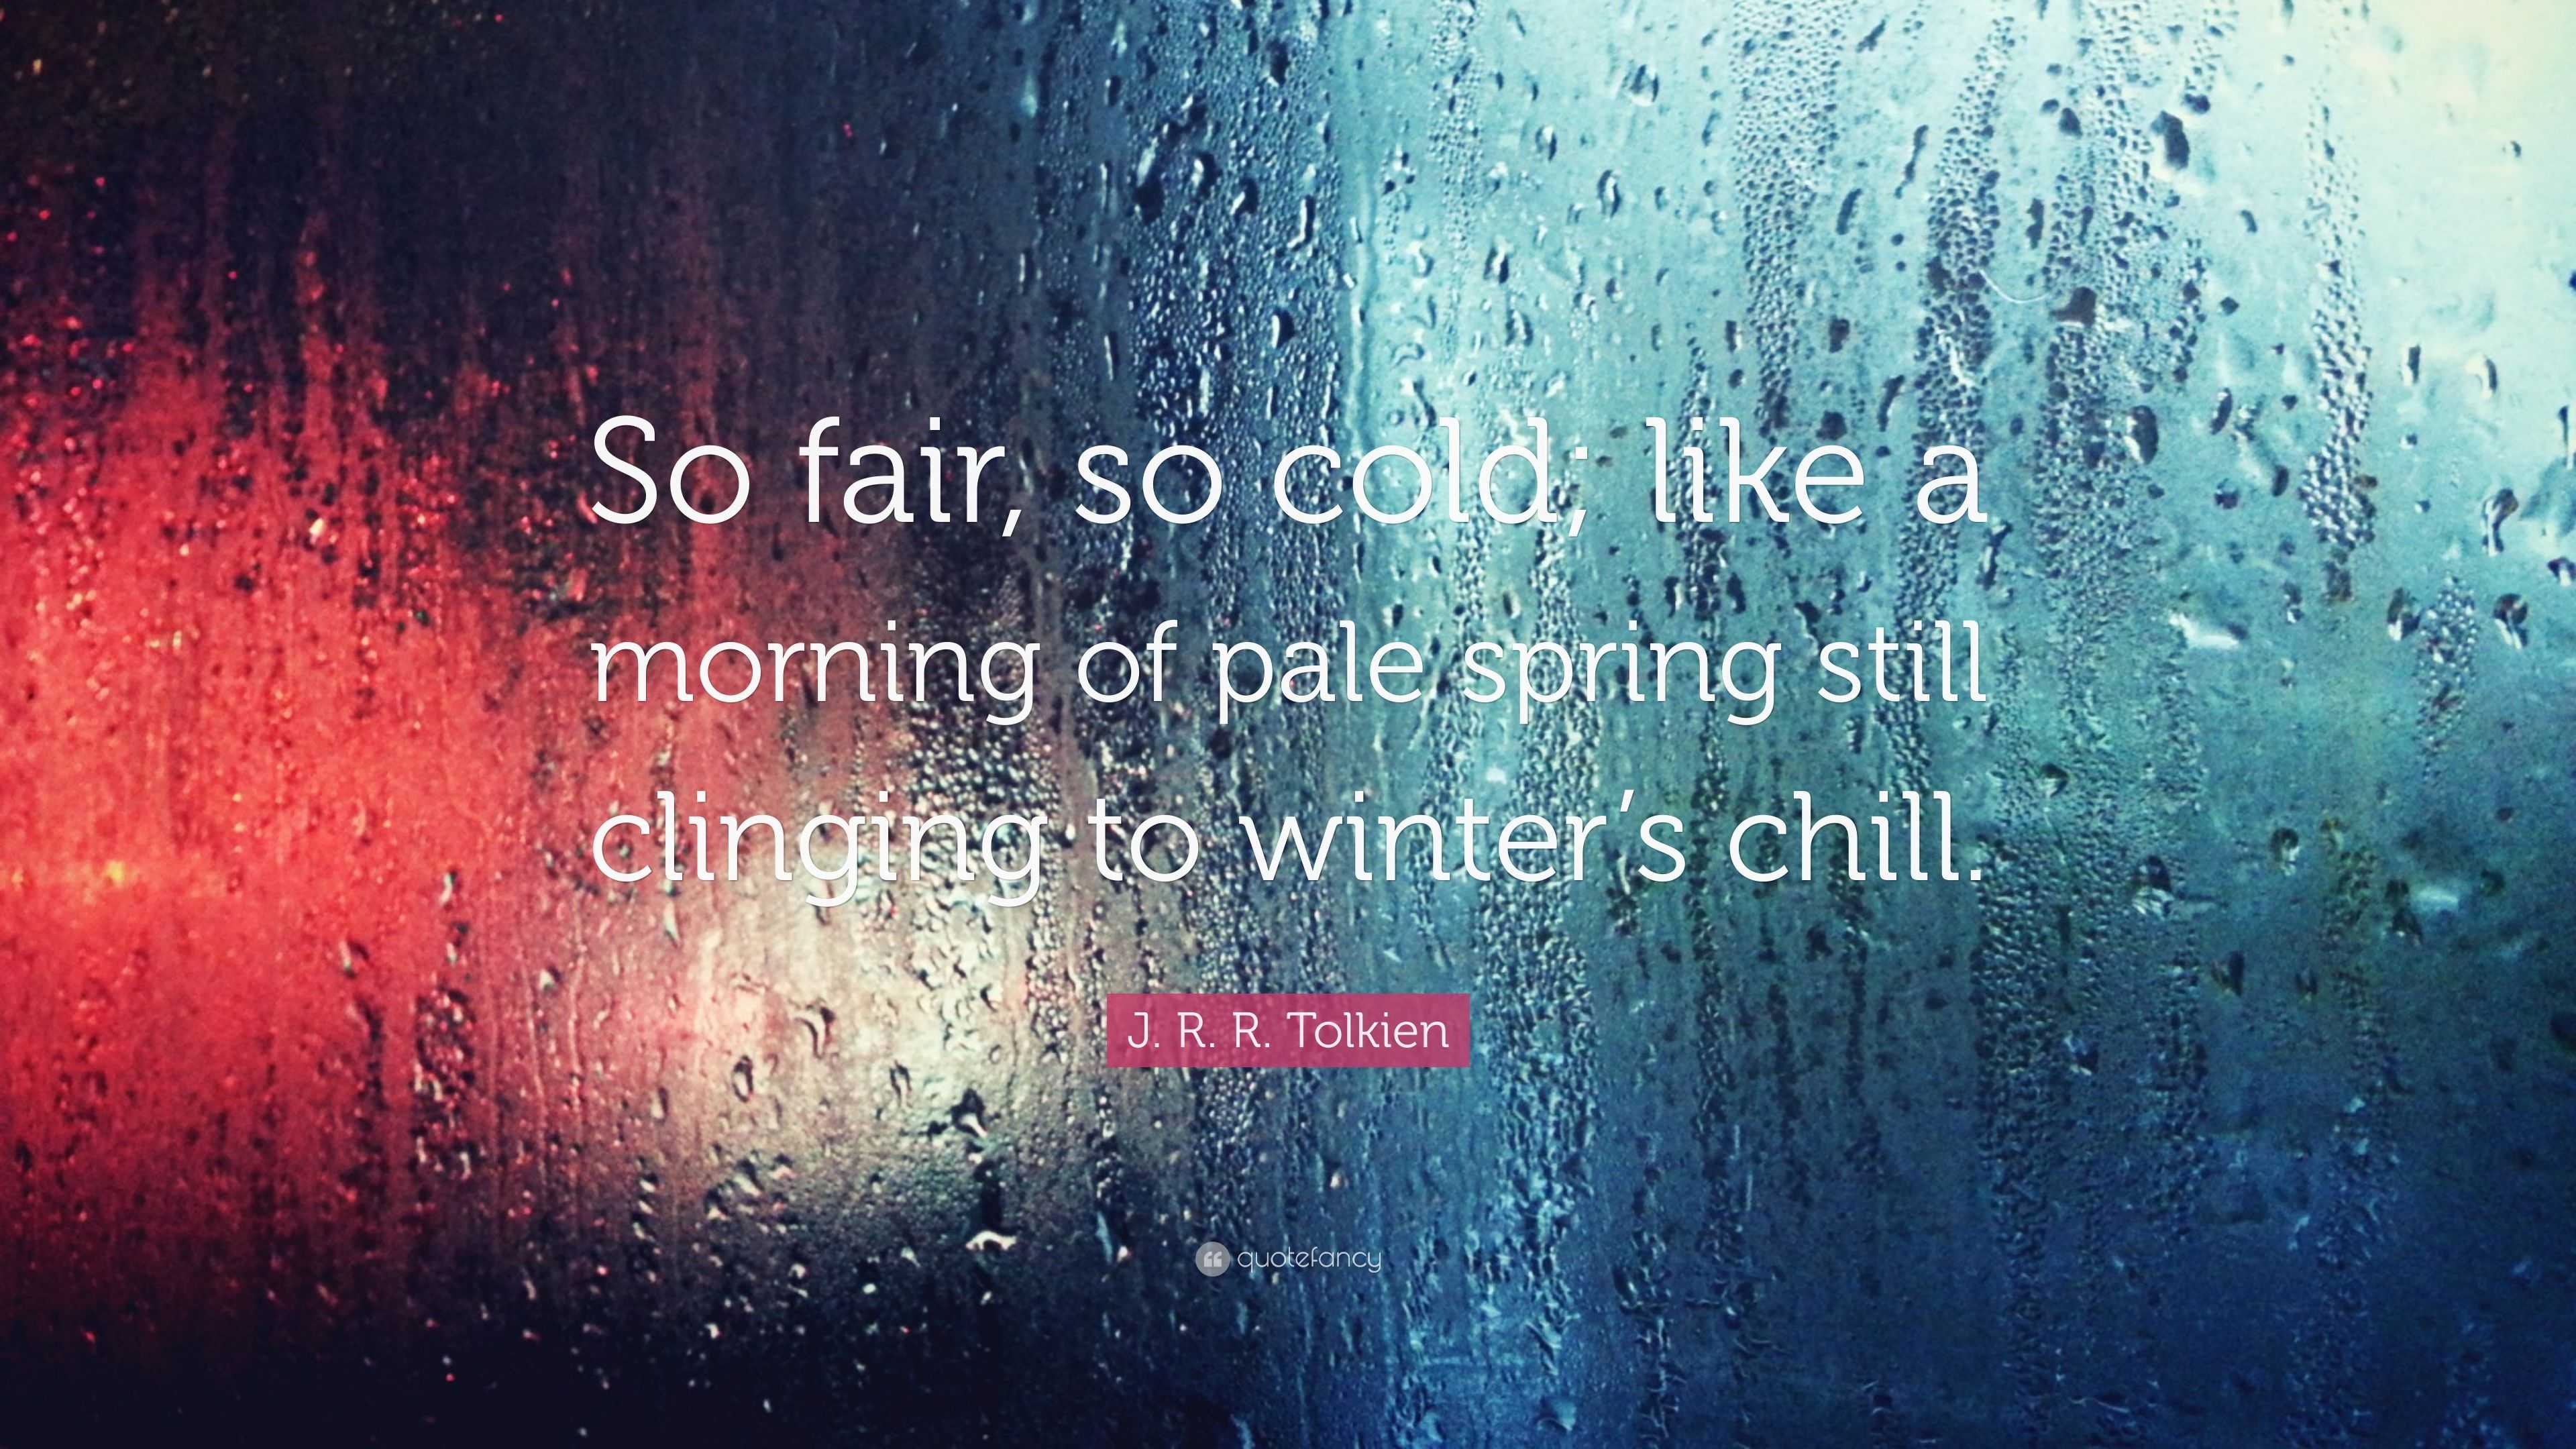 J. R. R. Tolkien Quote: “So fair, so cold; like a morning of pale